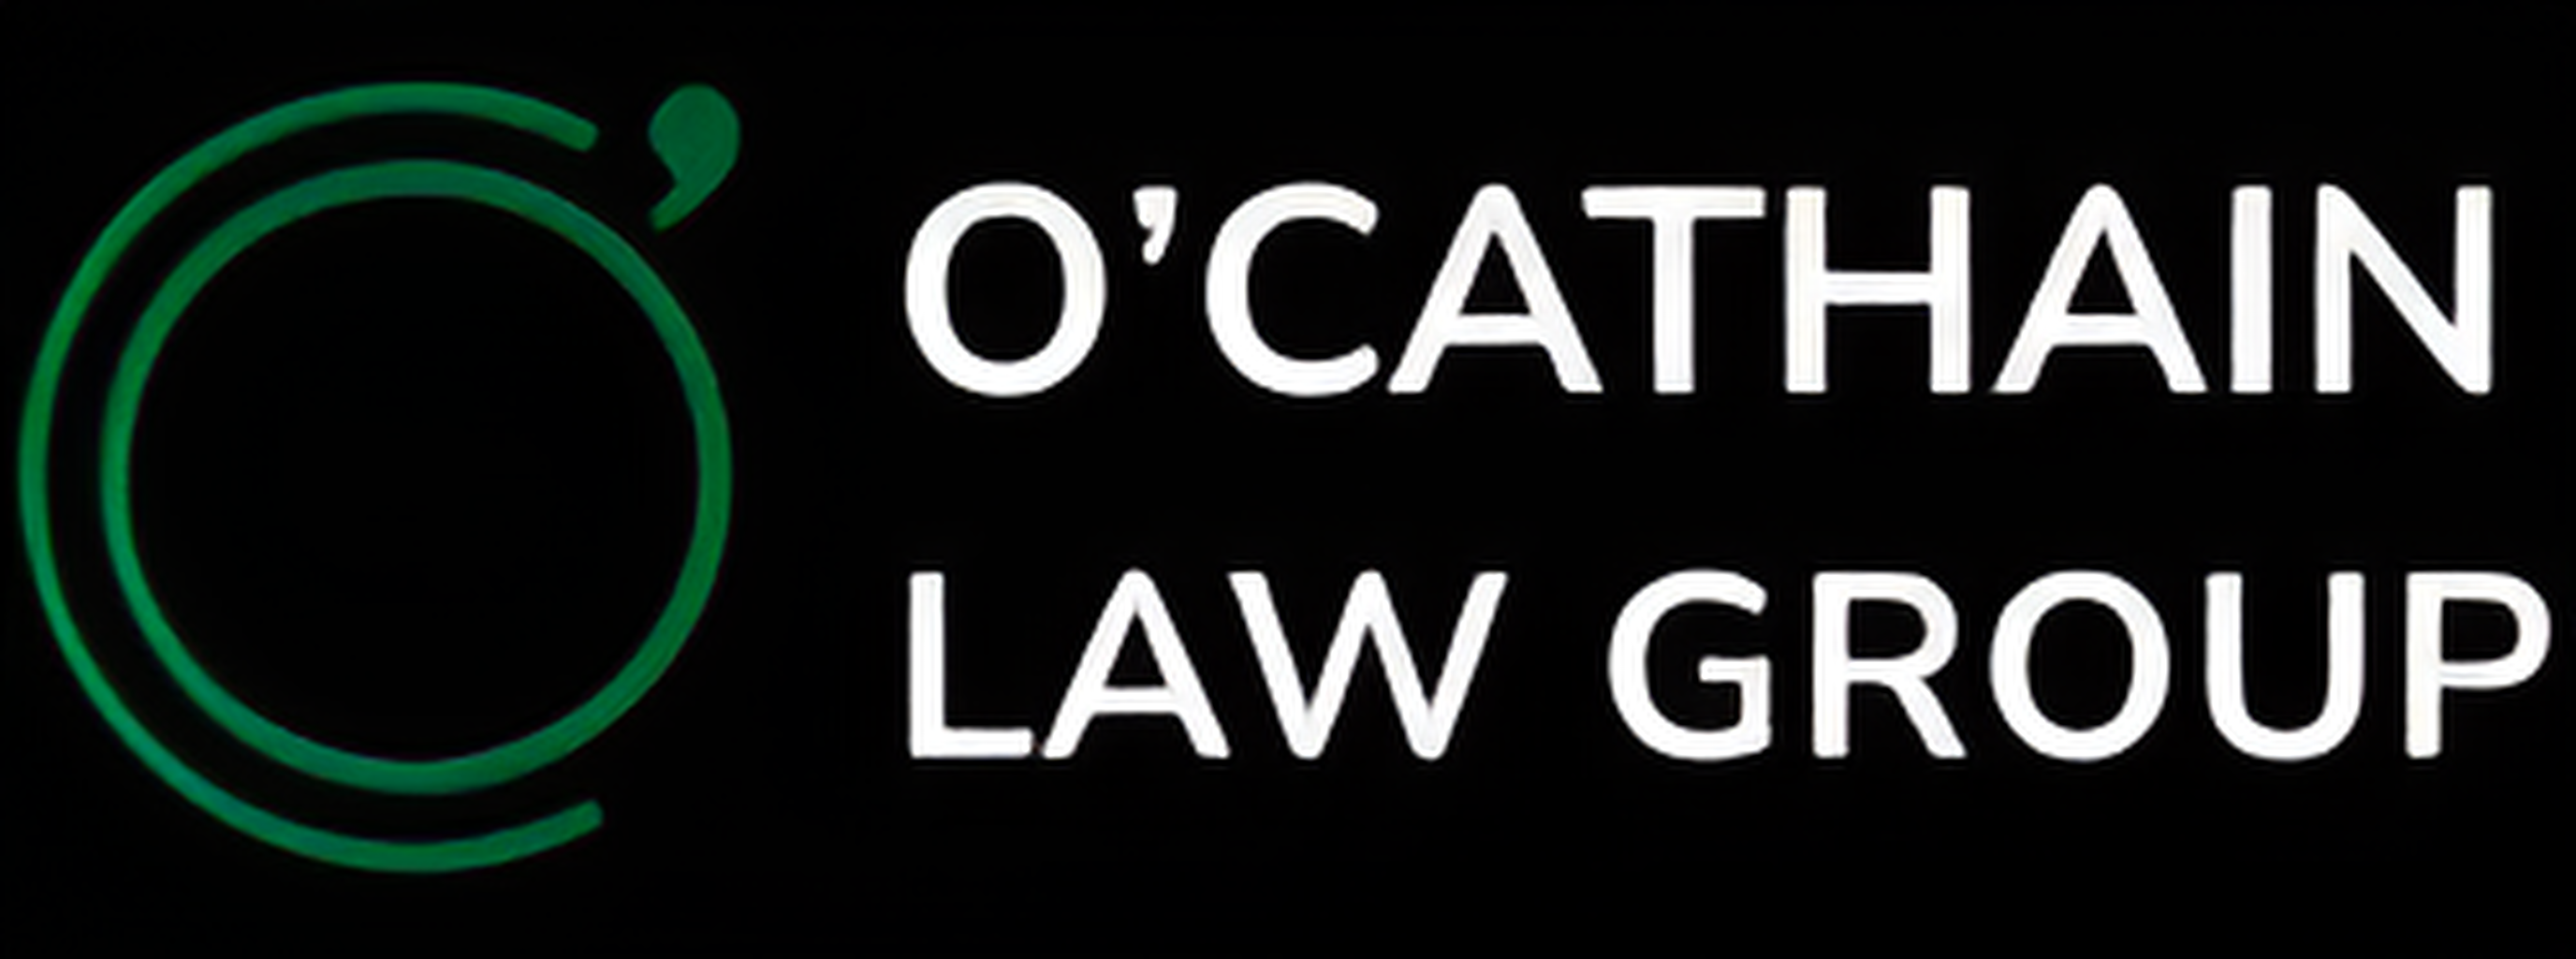 Welcome to the relaunch of the O’Cathain Law Group website— olgnj.com 2.0, in web speak